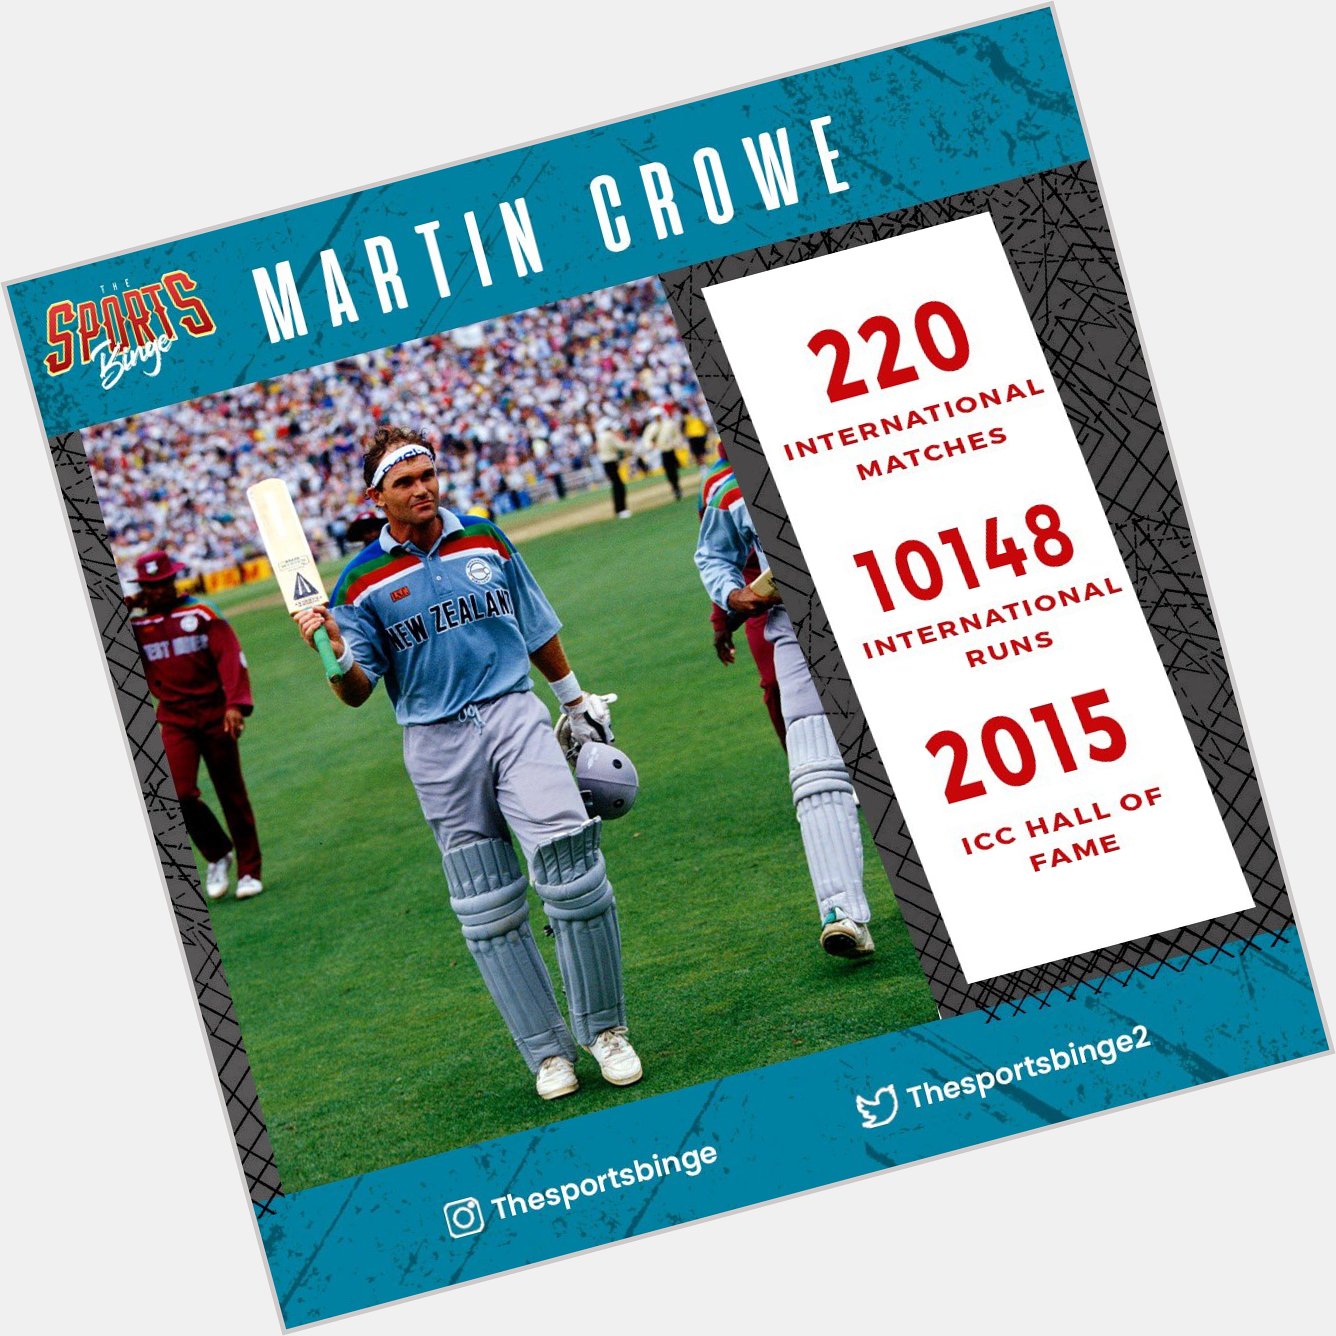 Happy Birthday to the late Martin Crowe, New Zealand legend  